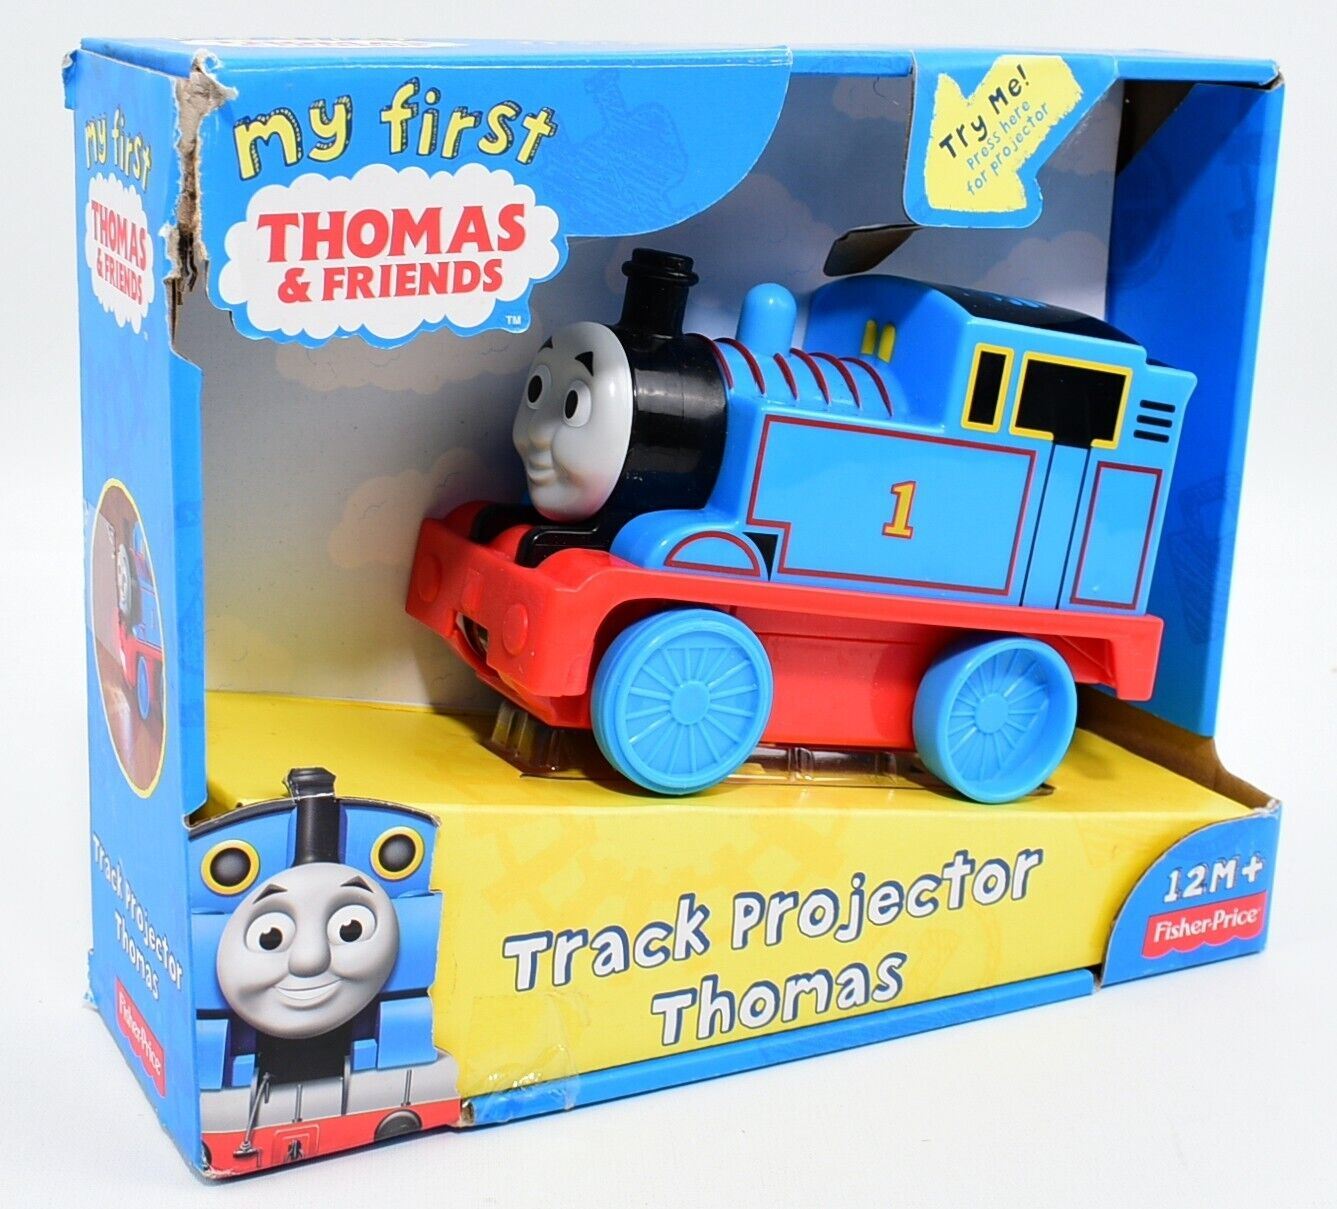 THOMAS & FRIENDS Lights & Sounds Tract Projector by Fisher-Price, 12m+